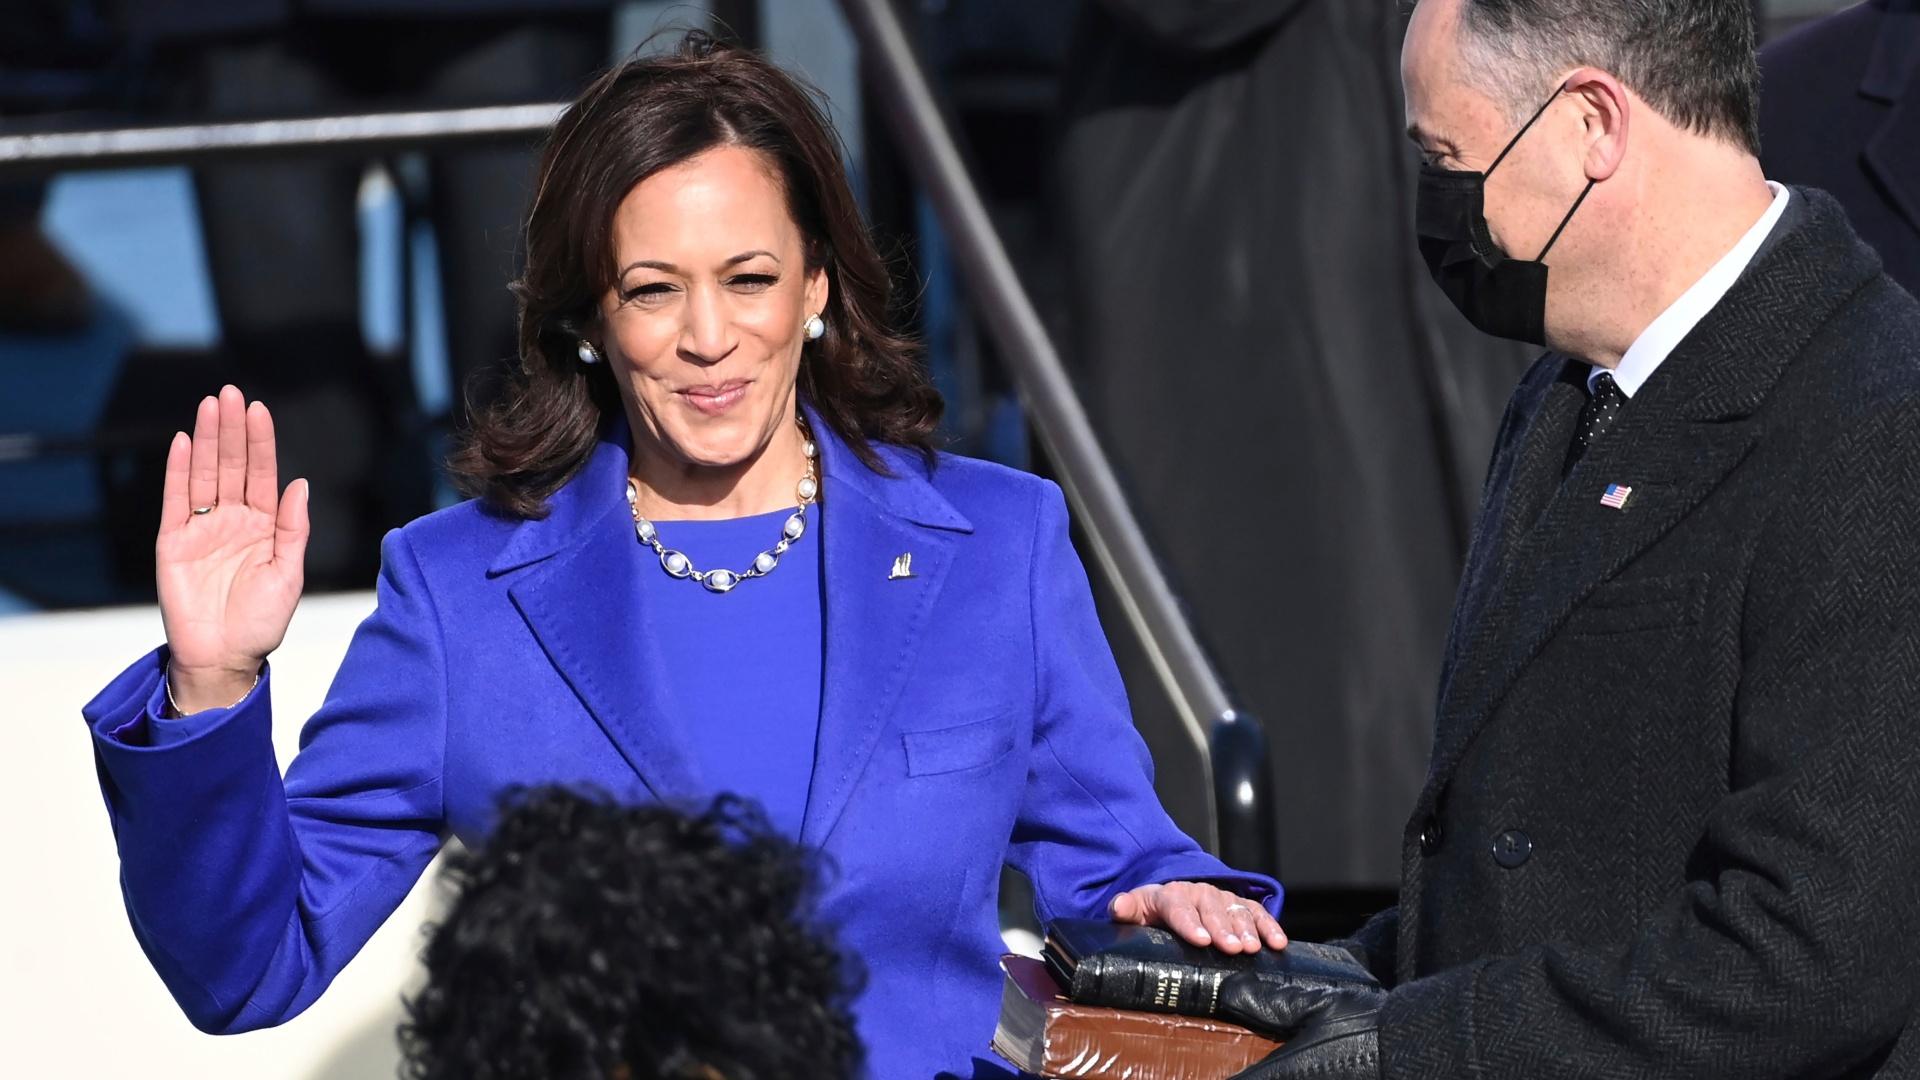 Kamala Harris is sworn in as vice president by Supreme Court Justice Sonia Sotomayor as her husband Doug Emhoff holds the Bible during the 59th Presidential Inauguration at the U.S. Capitol in Washington, Wednesday, Jan. 20, 2021. (Saul Loeb / Pool Photo via AP)